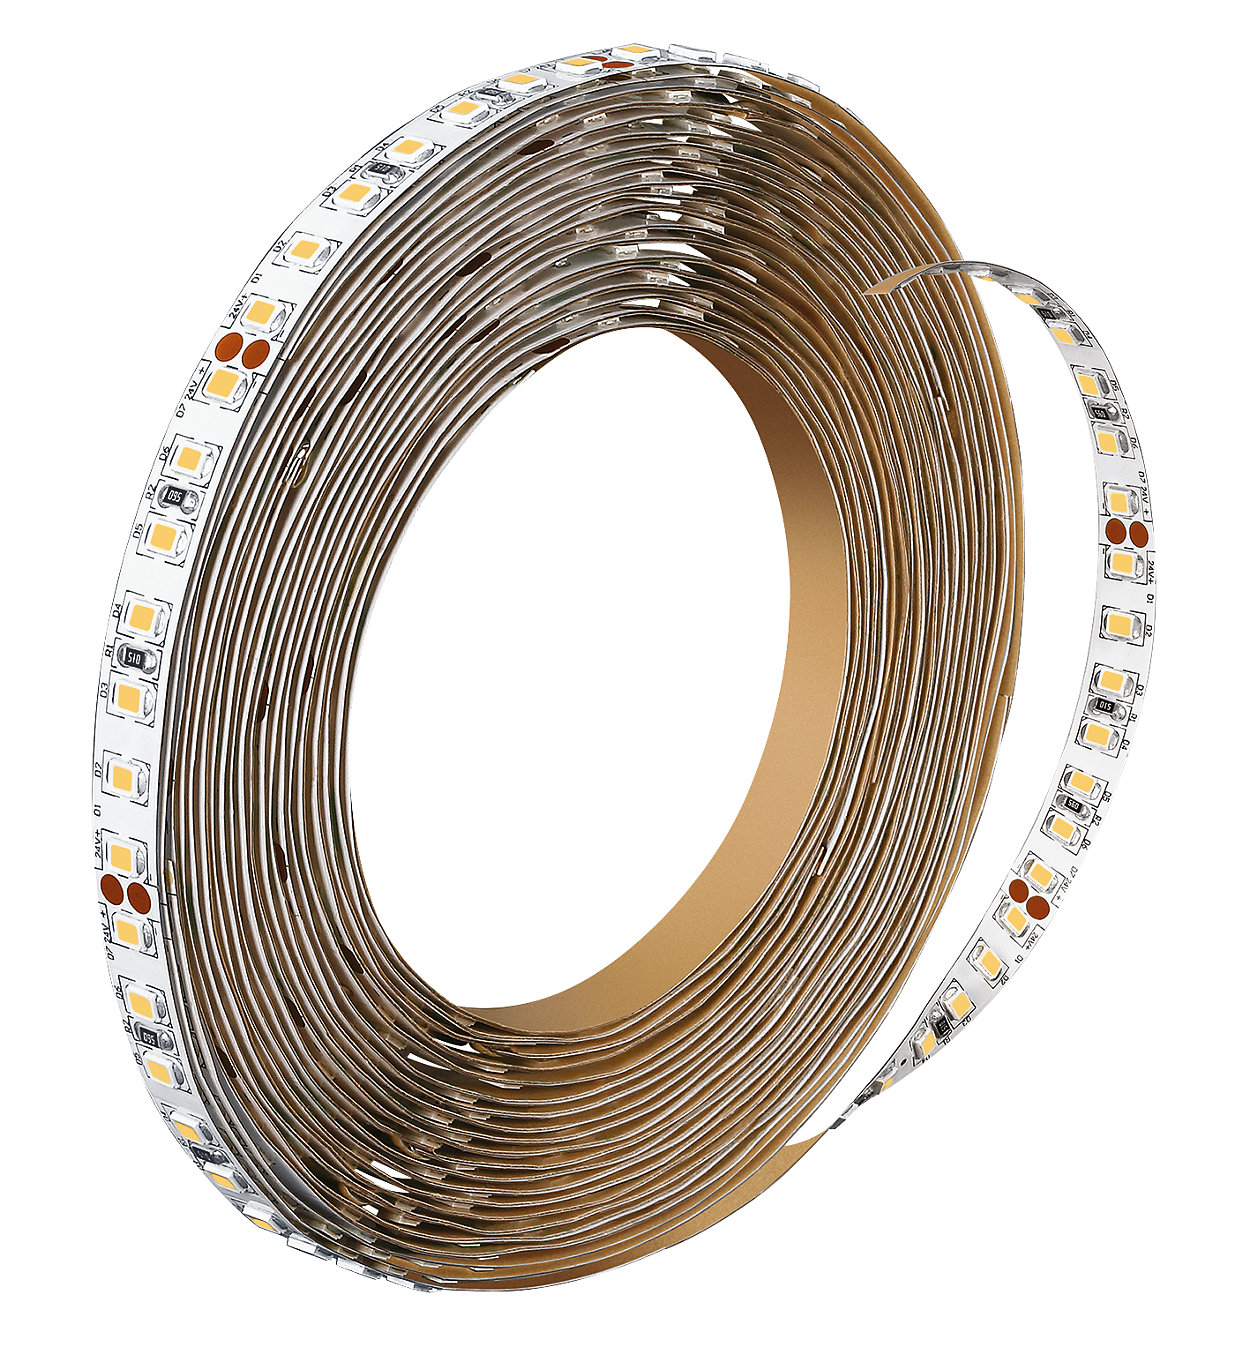 Slim LED strip offering high quality light with diversified options in terms of brightness and light color